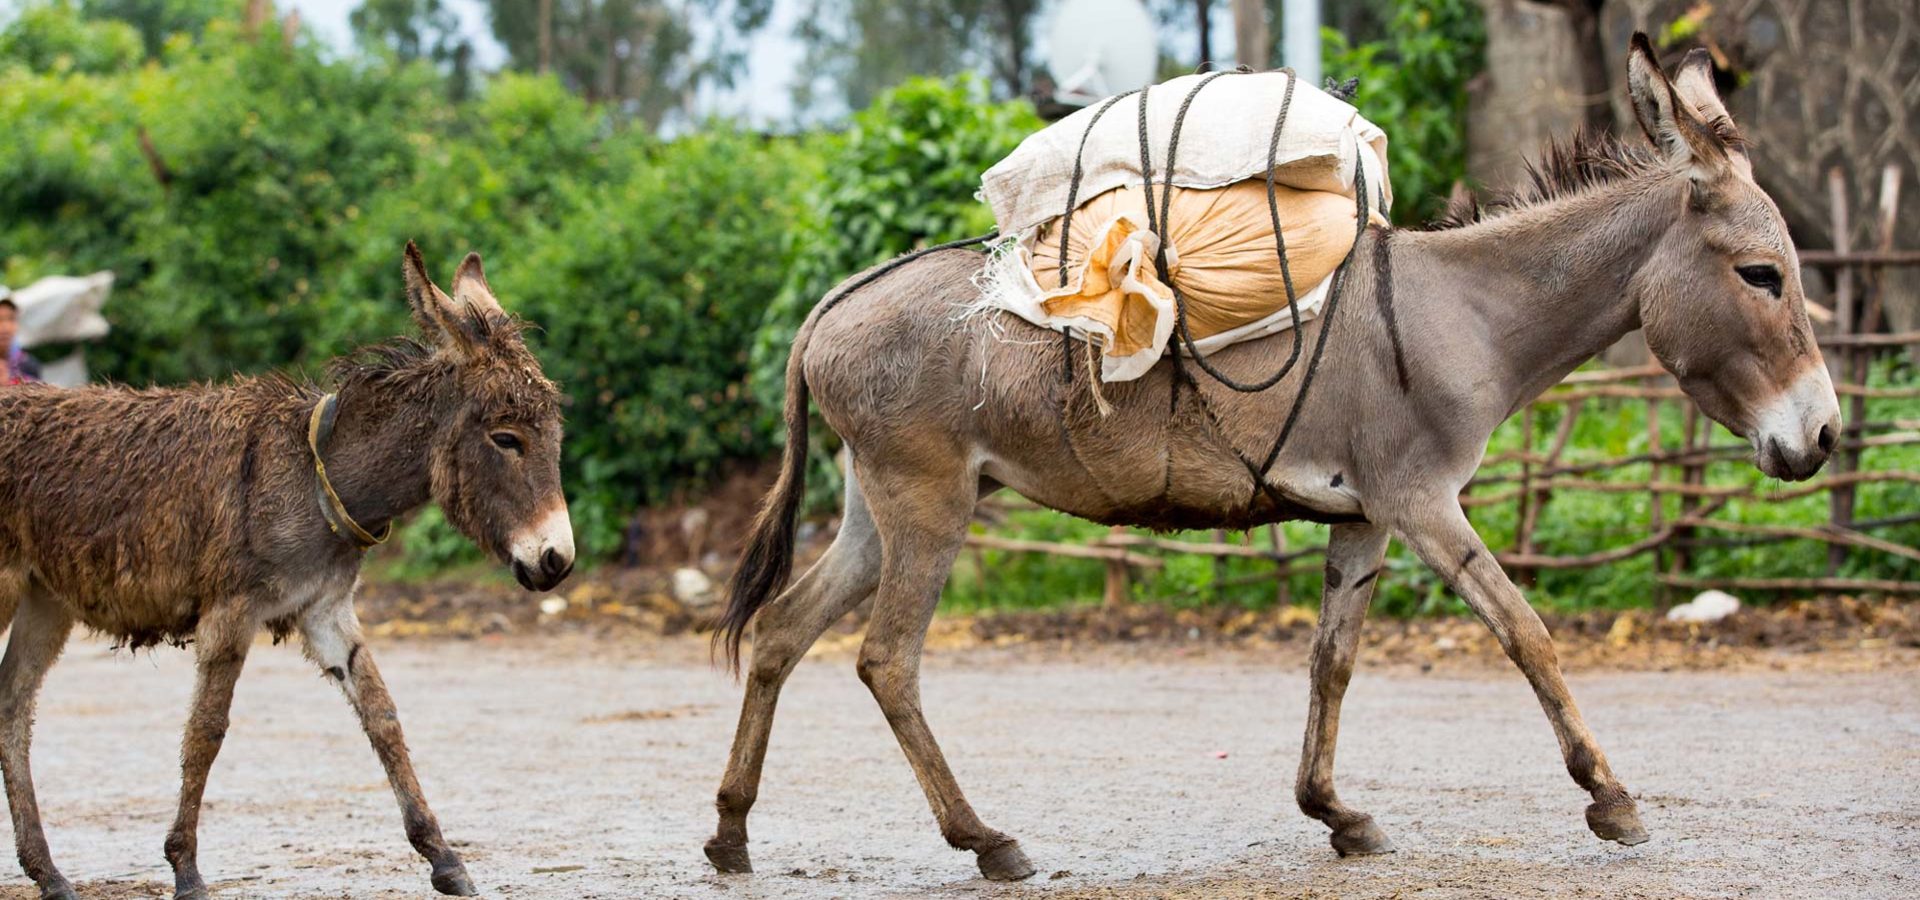 Gallery Photos of "Two Donkeys On The Stony Road" .